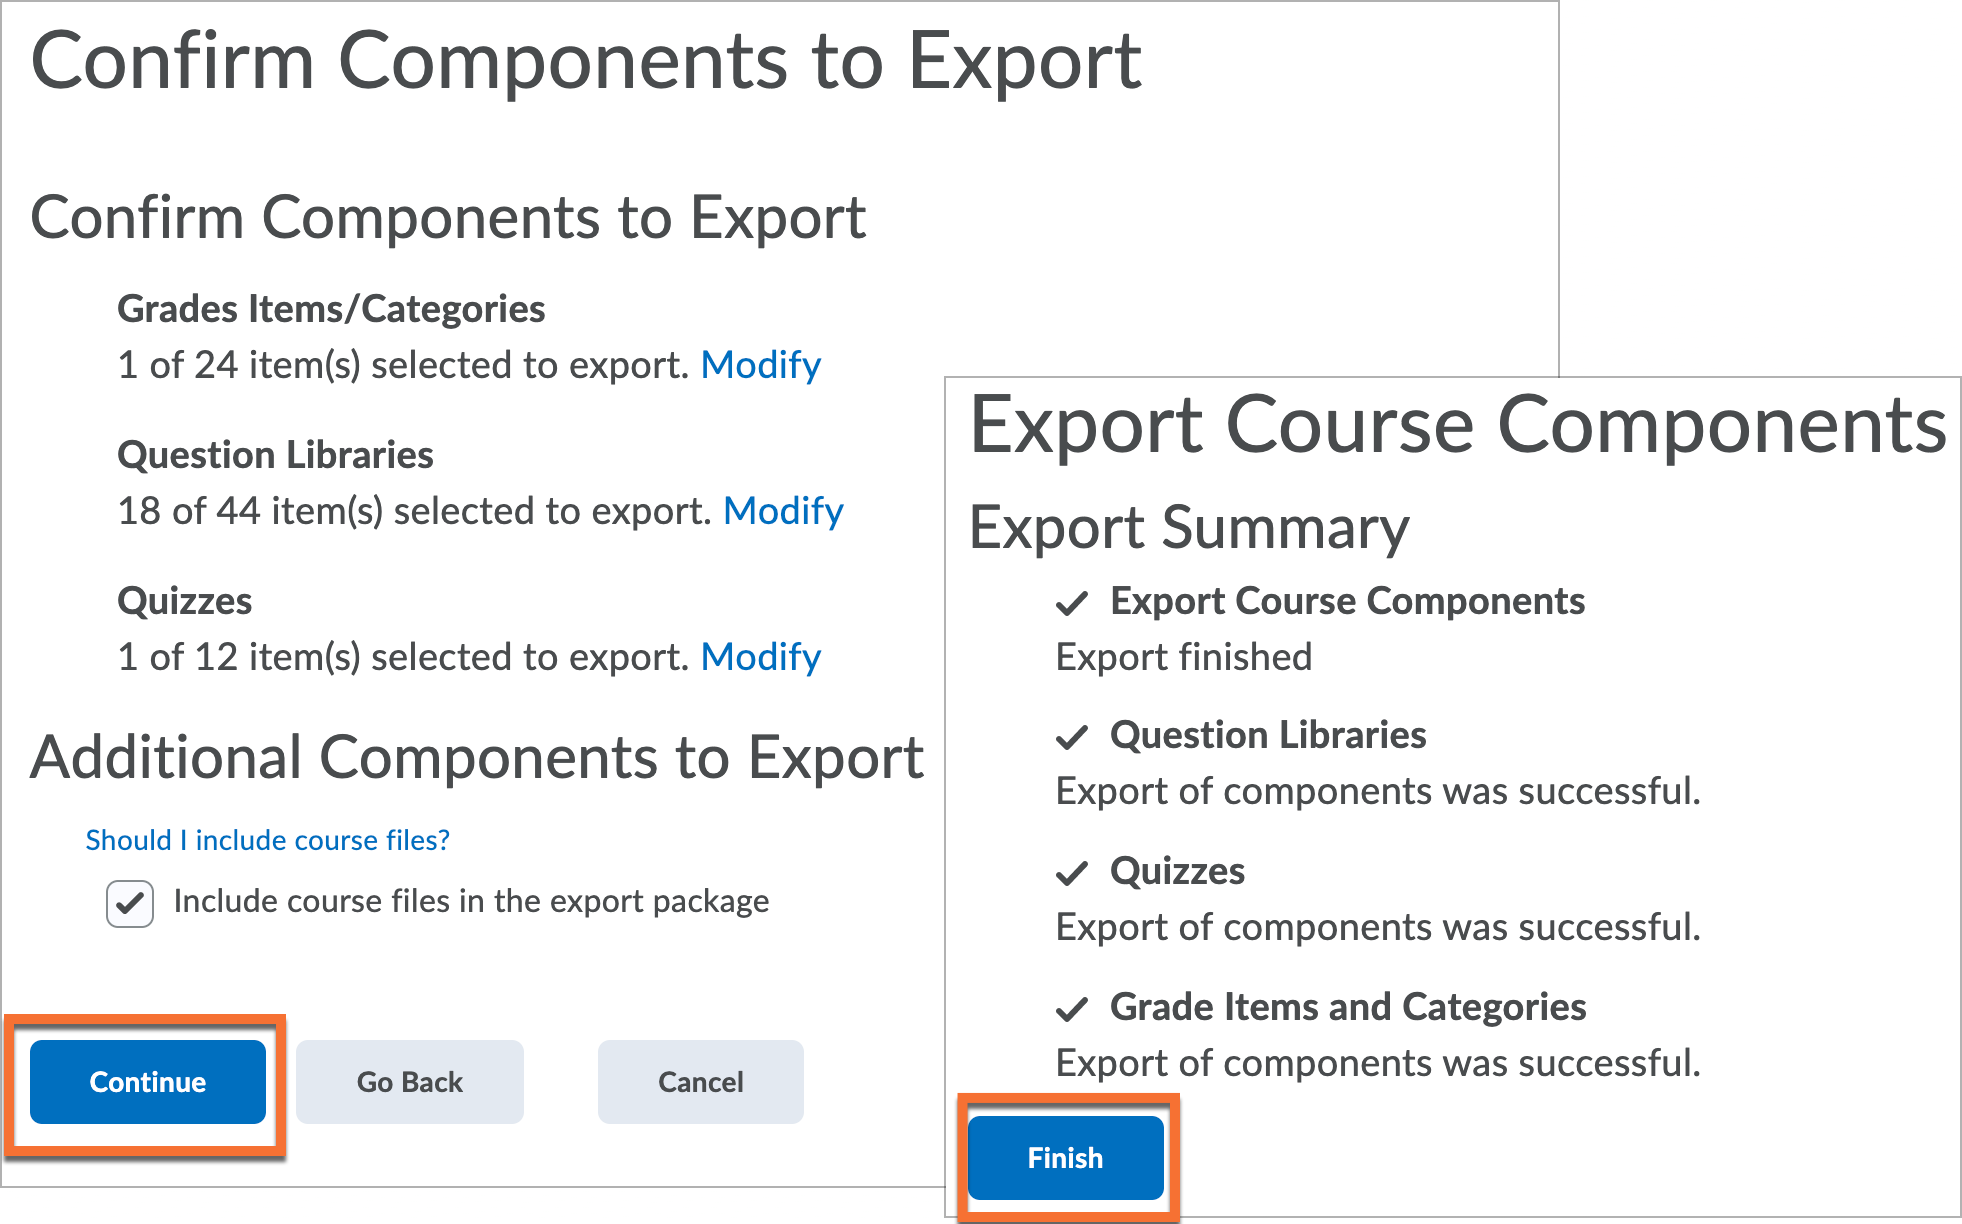 Export confirmation and summary pages